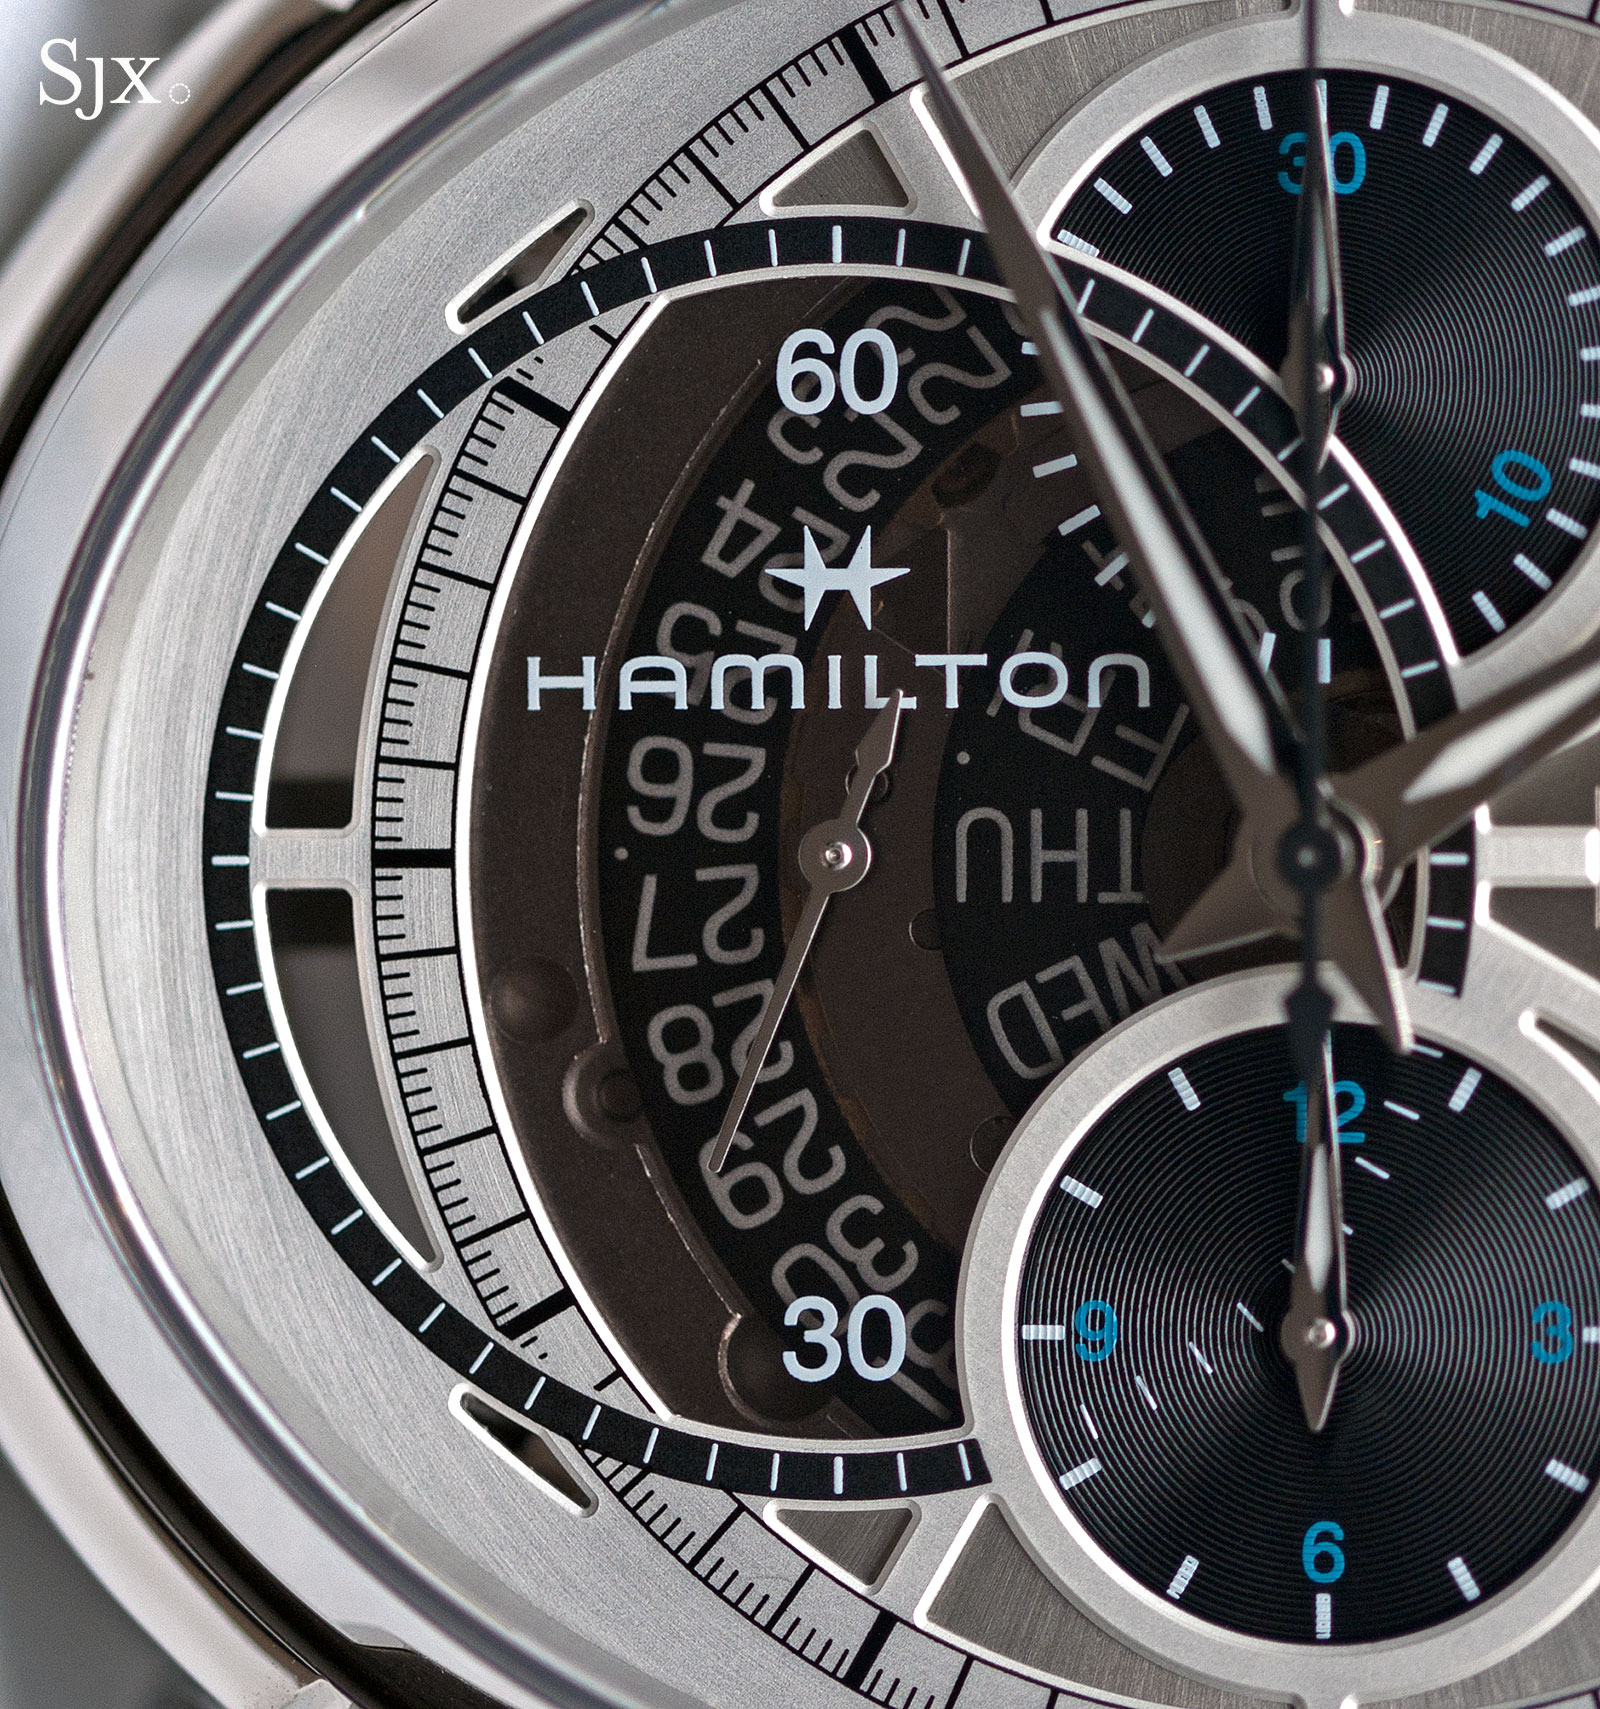 Hands-On with the Hamilton Jazzmaster Face II Double-Sided Chronograph SJX Watches